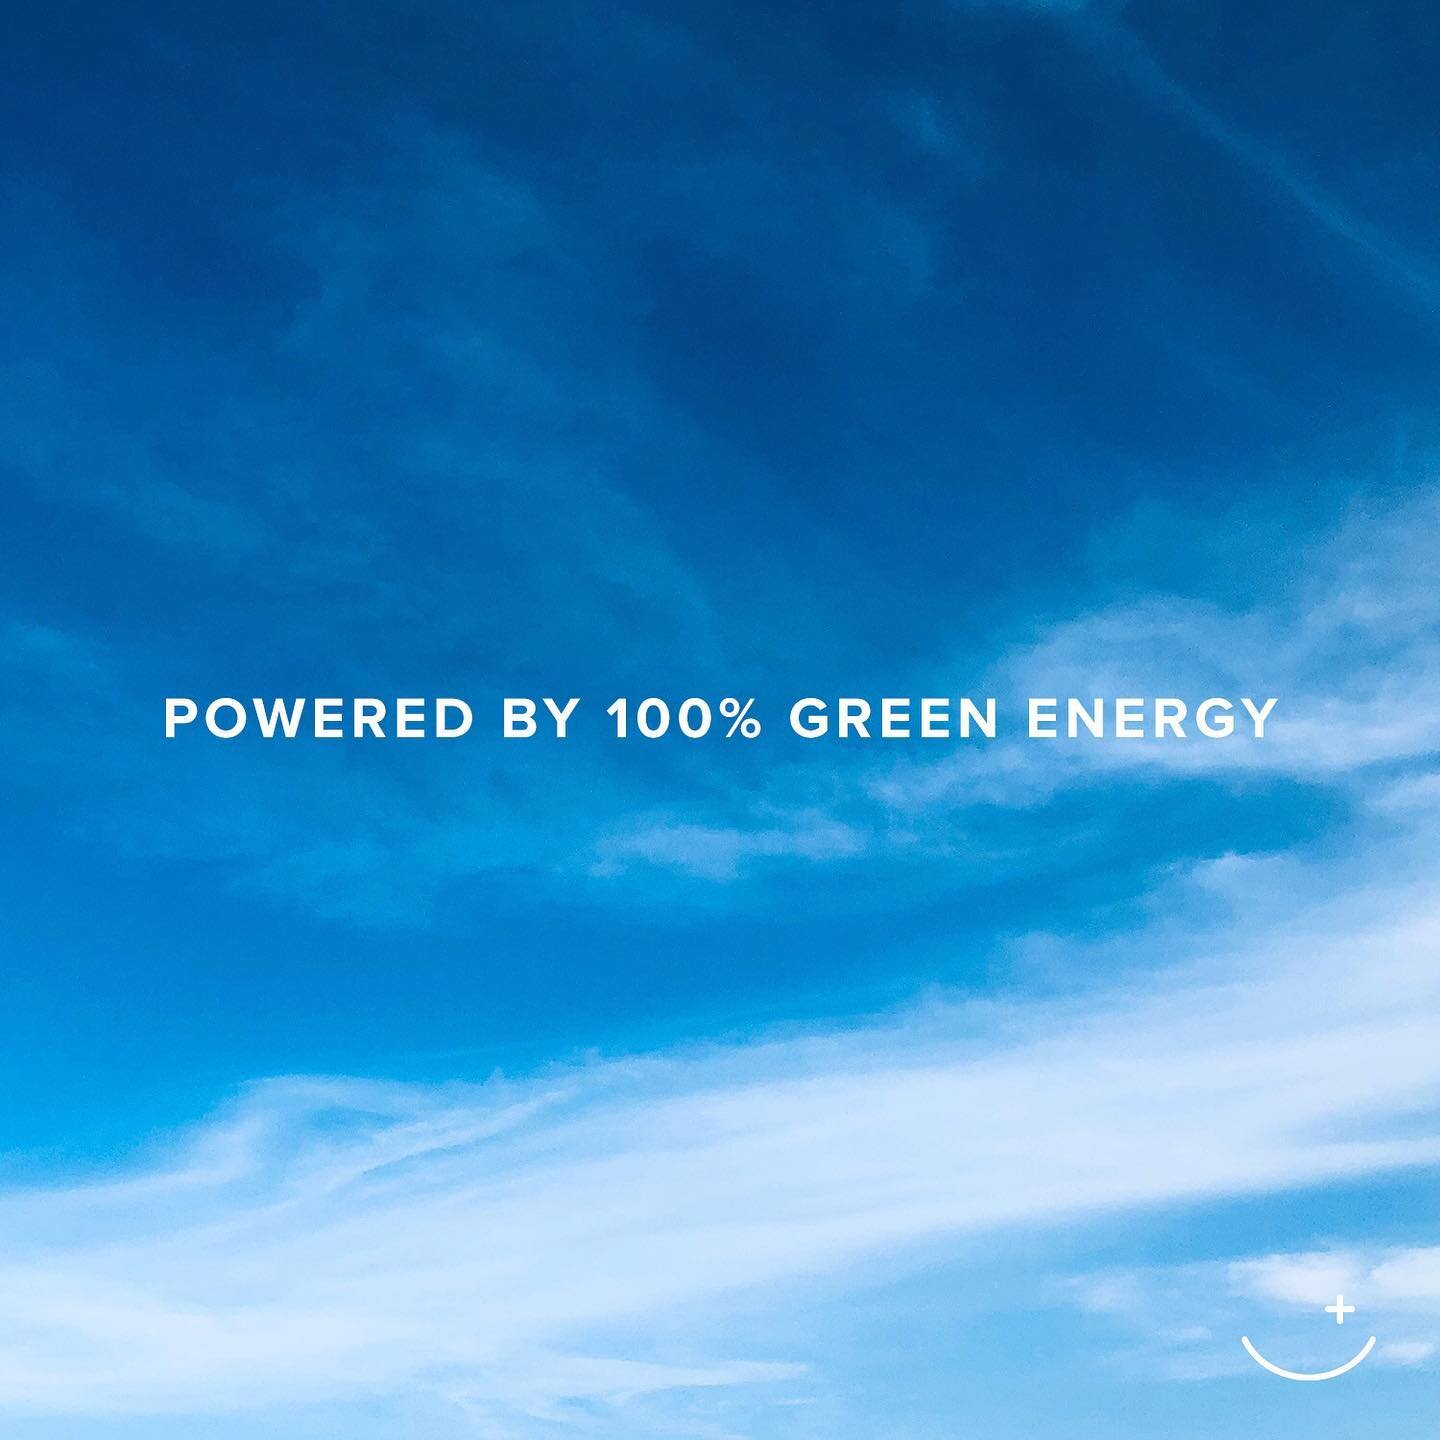 We believe that protecting our planet and the people on it is a winning proposition. Our clients are in the business of brokering renewable energy, manufacturing natural products, banking underserved communities, promoting minority culture, serving f